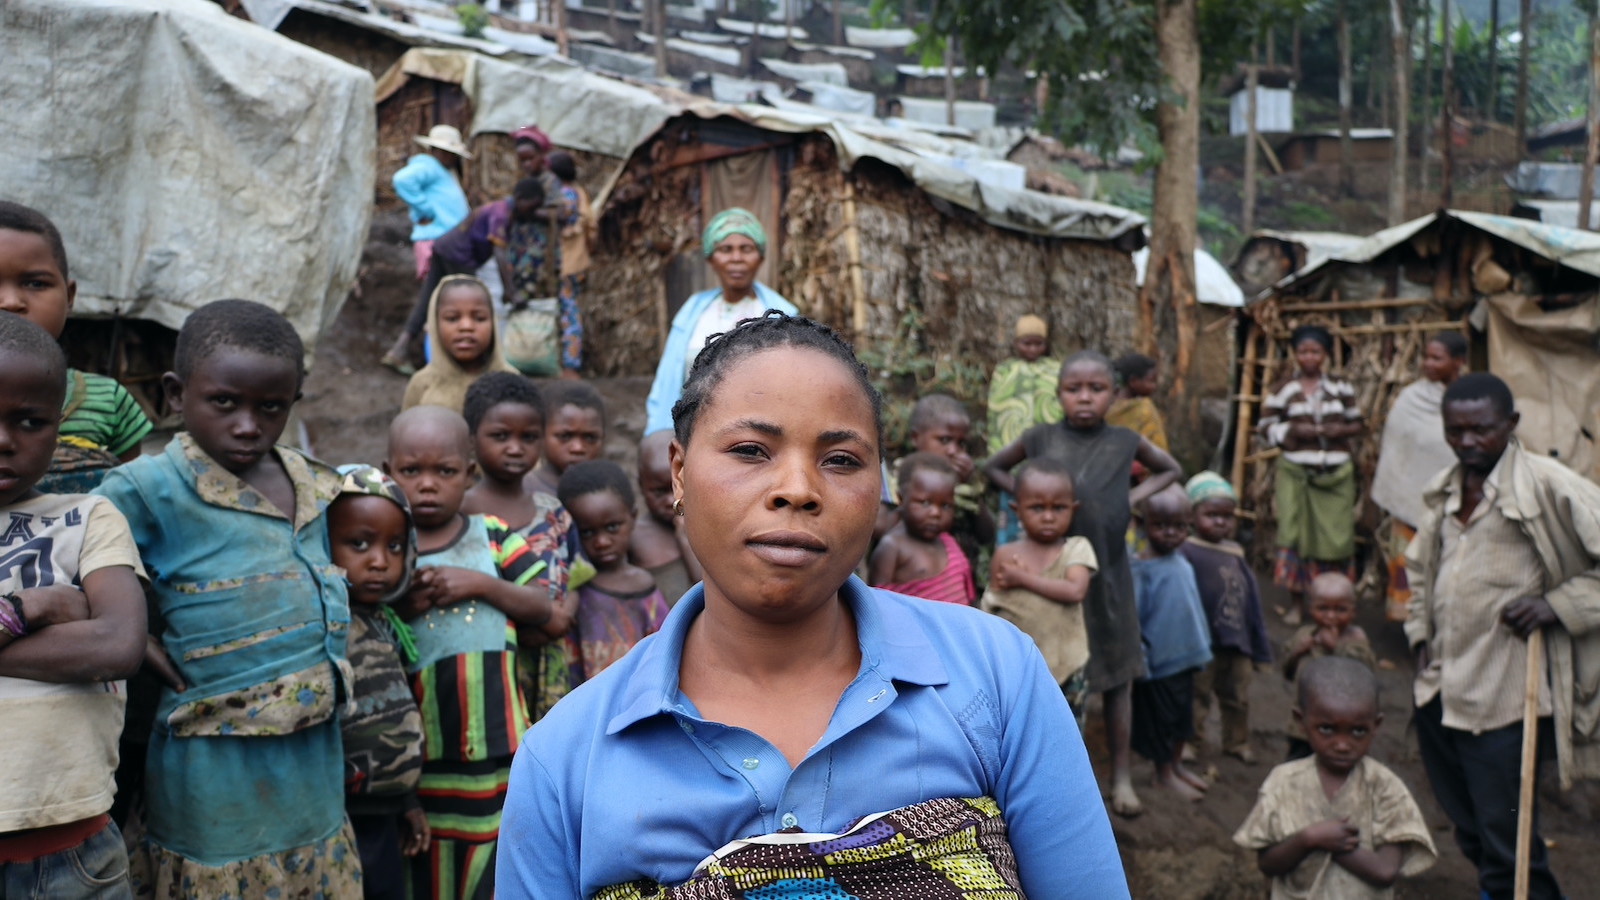 At the Bulengo camp, one of the newest camps for internally-displaced Congolese in DRC. (Photo: Concern Worldwide)